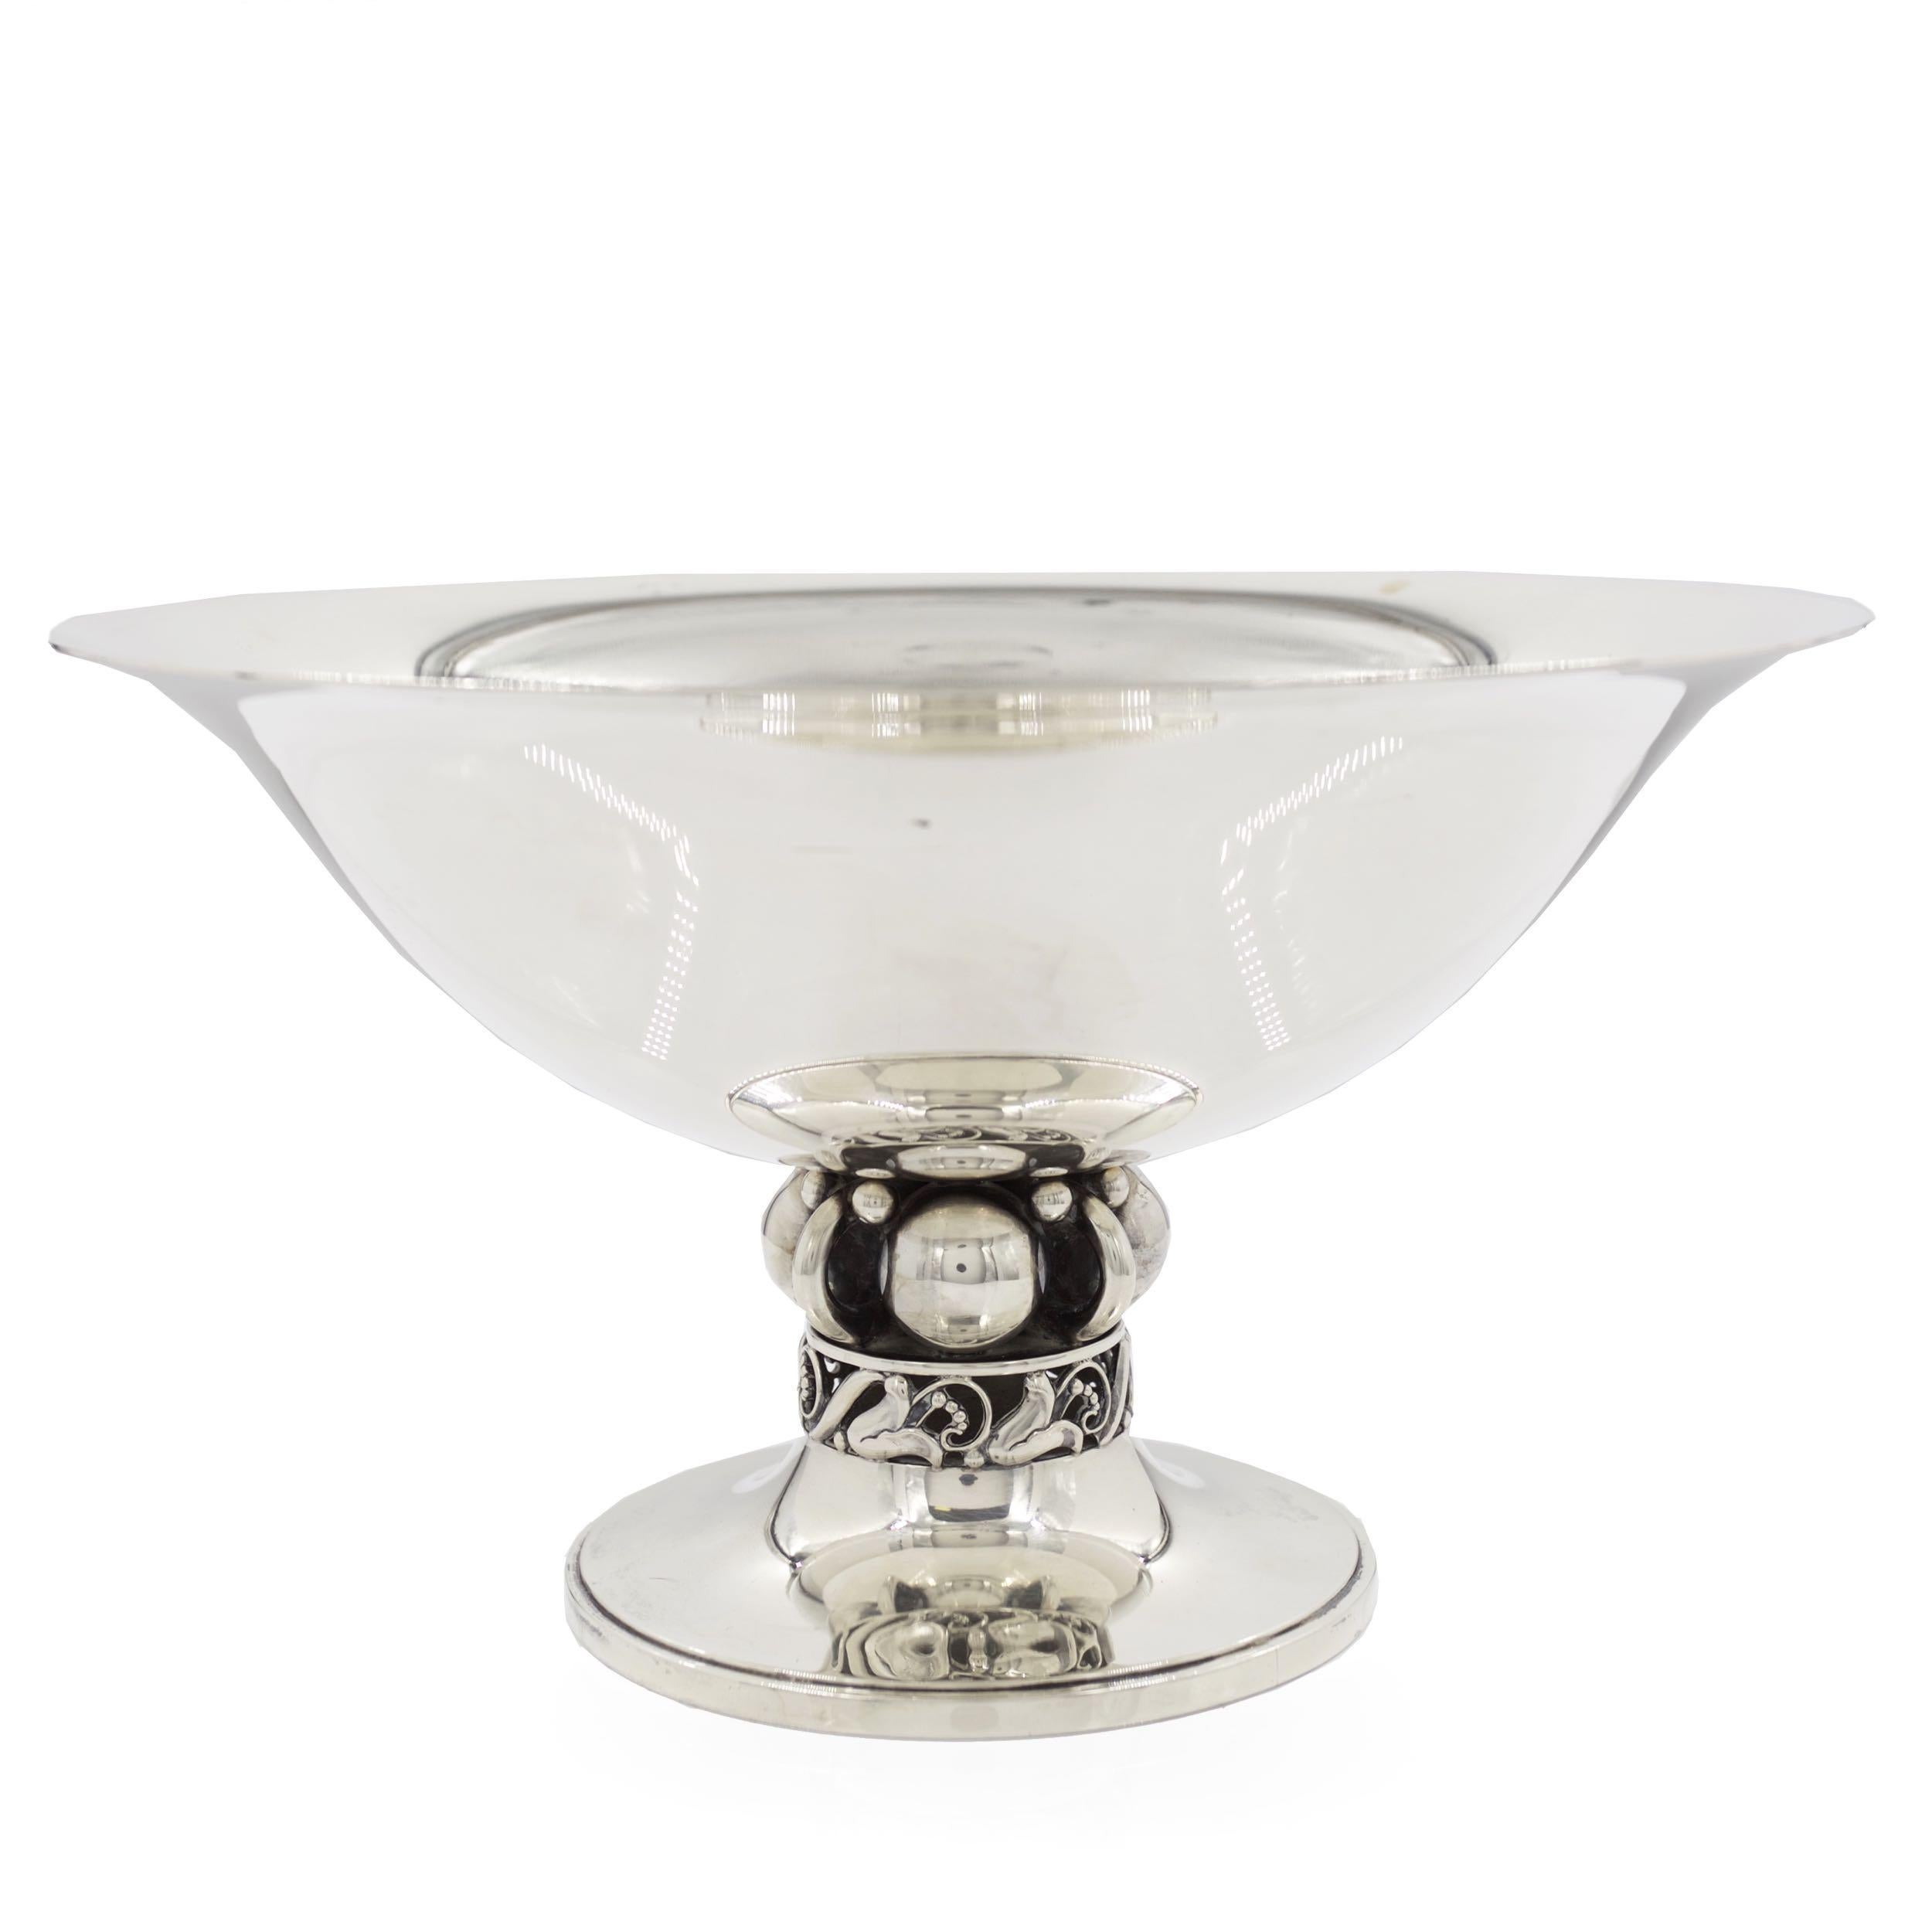 This fine sterling silver centerpiece bowl was designed by Alphonse La Paglia for Georg Jensen circa mid-20th century in his distinctive no. 118 form. It features a broad bowl with flared rim raised over a complex baluster of four spheres and wire